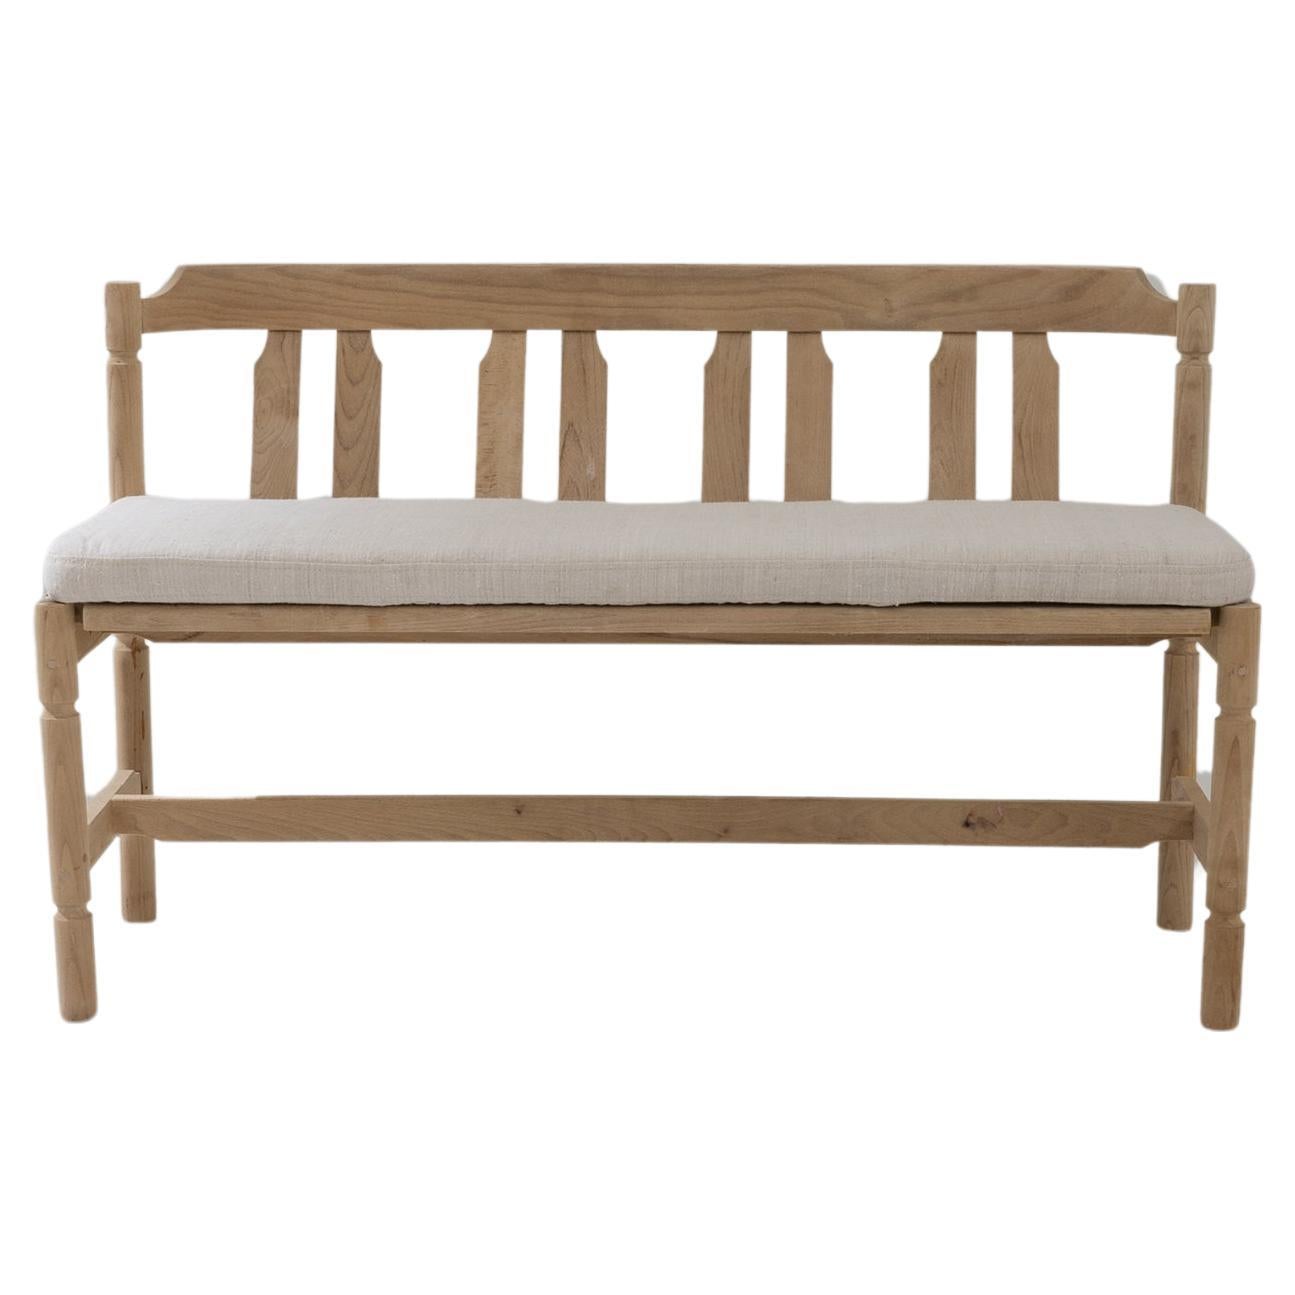 1920s Czech Country Upholstered Wooden Bench For Sale